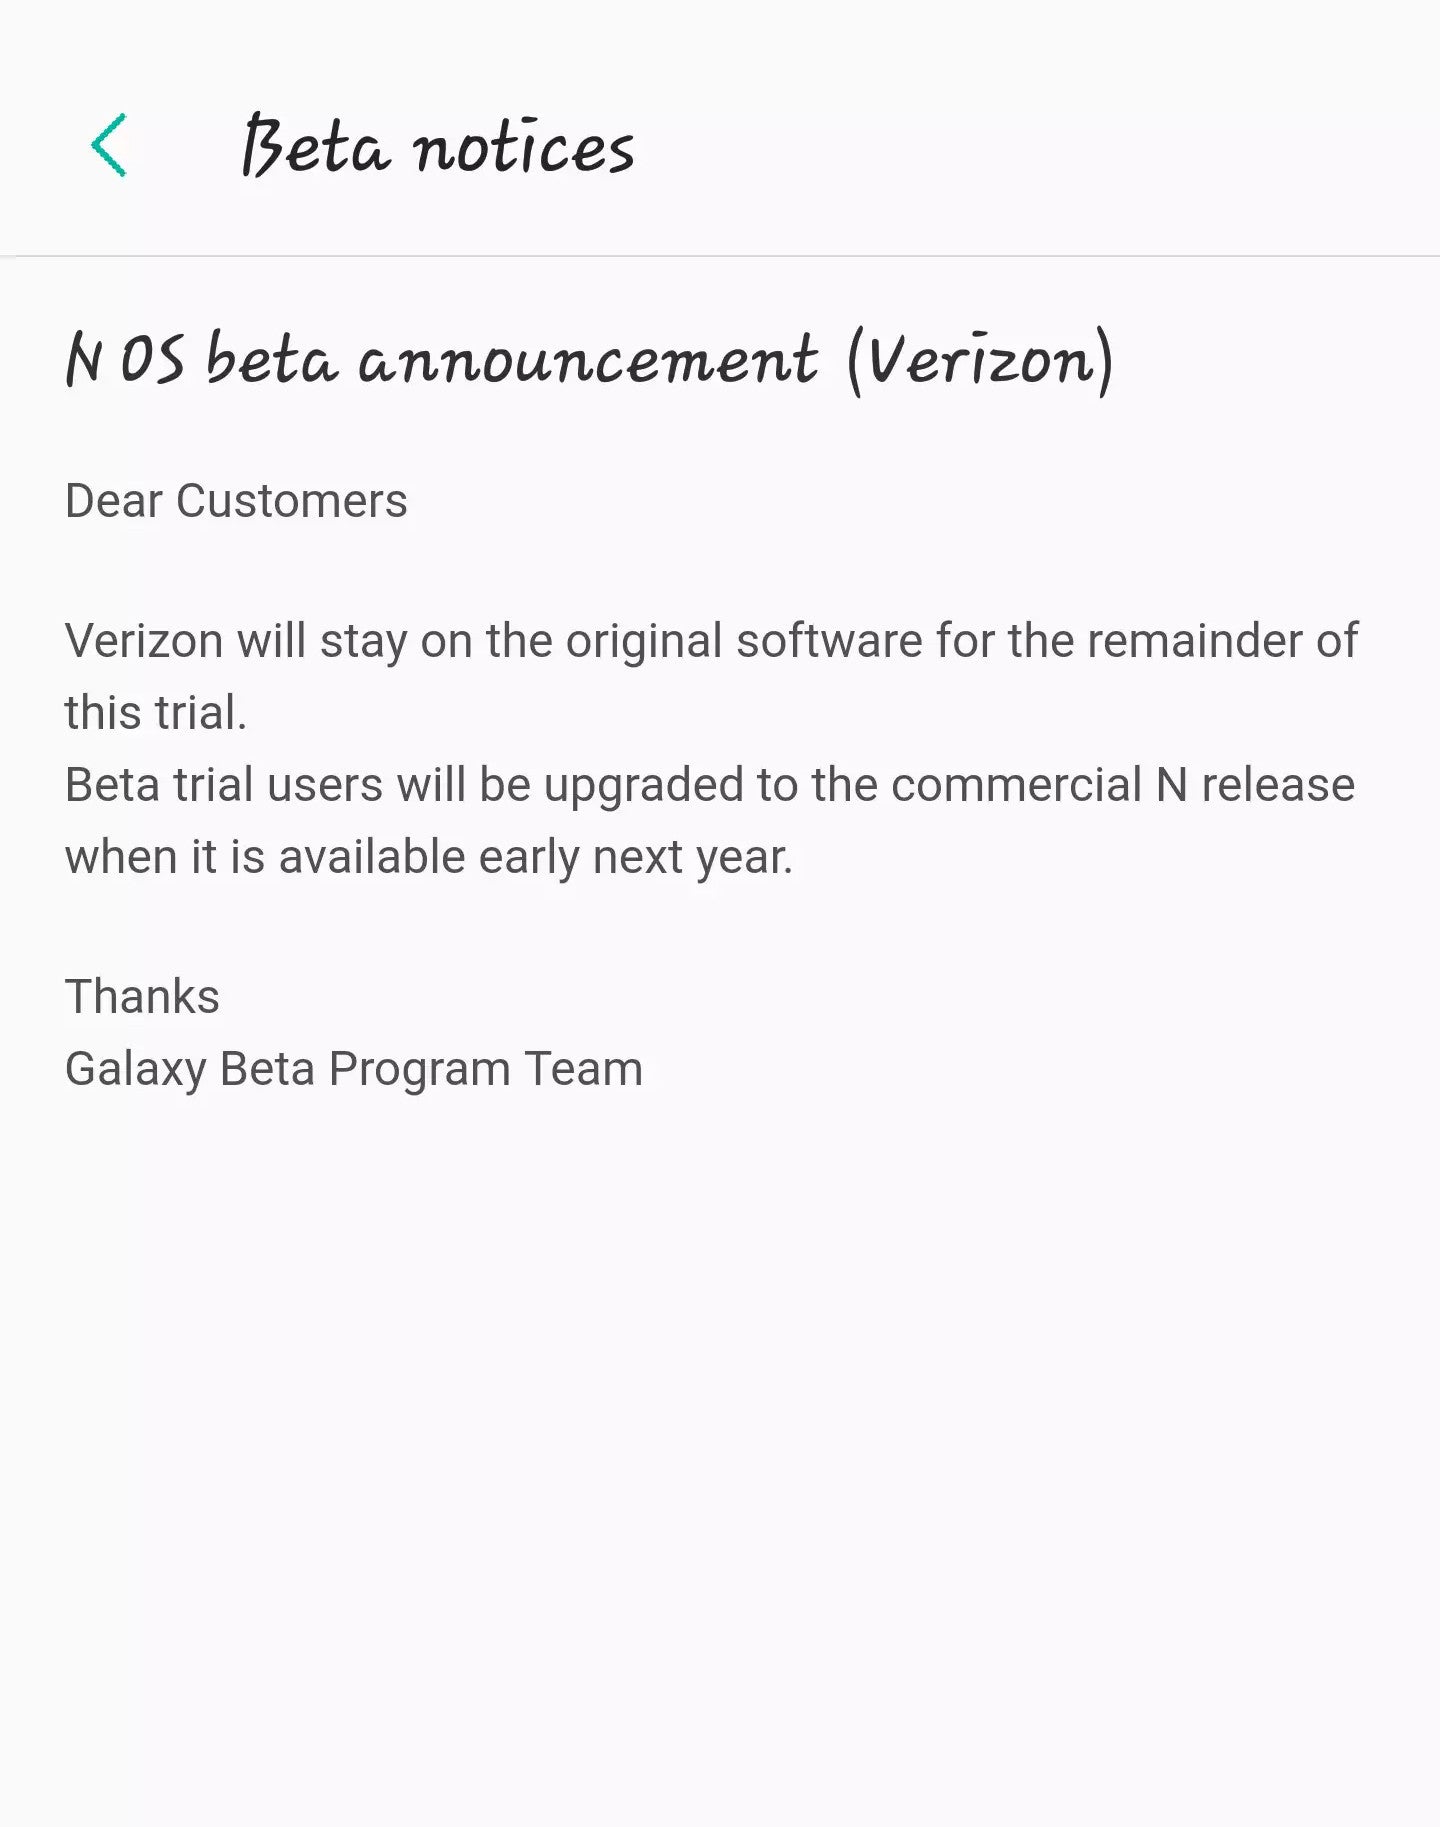 Verizon confirms Samsung Galaxy S7/S7 edge won't get Android Nougat until early 2017